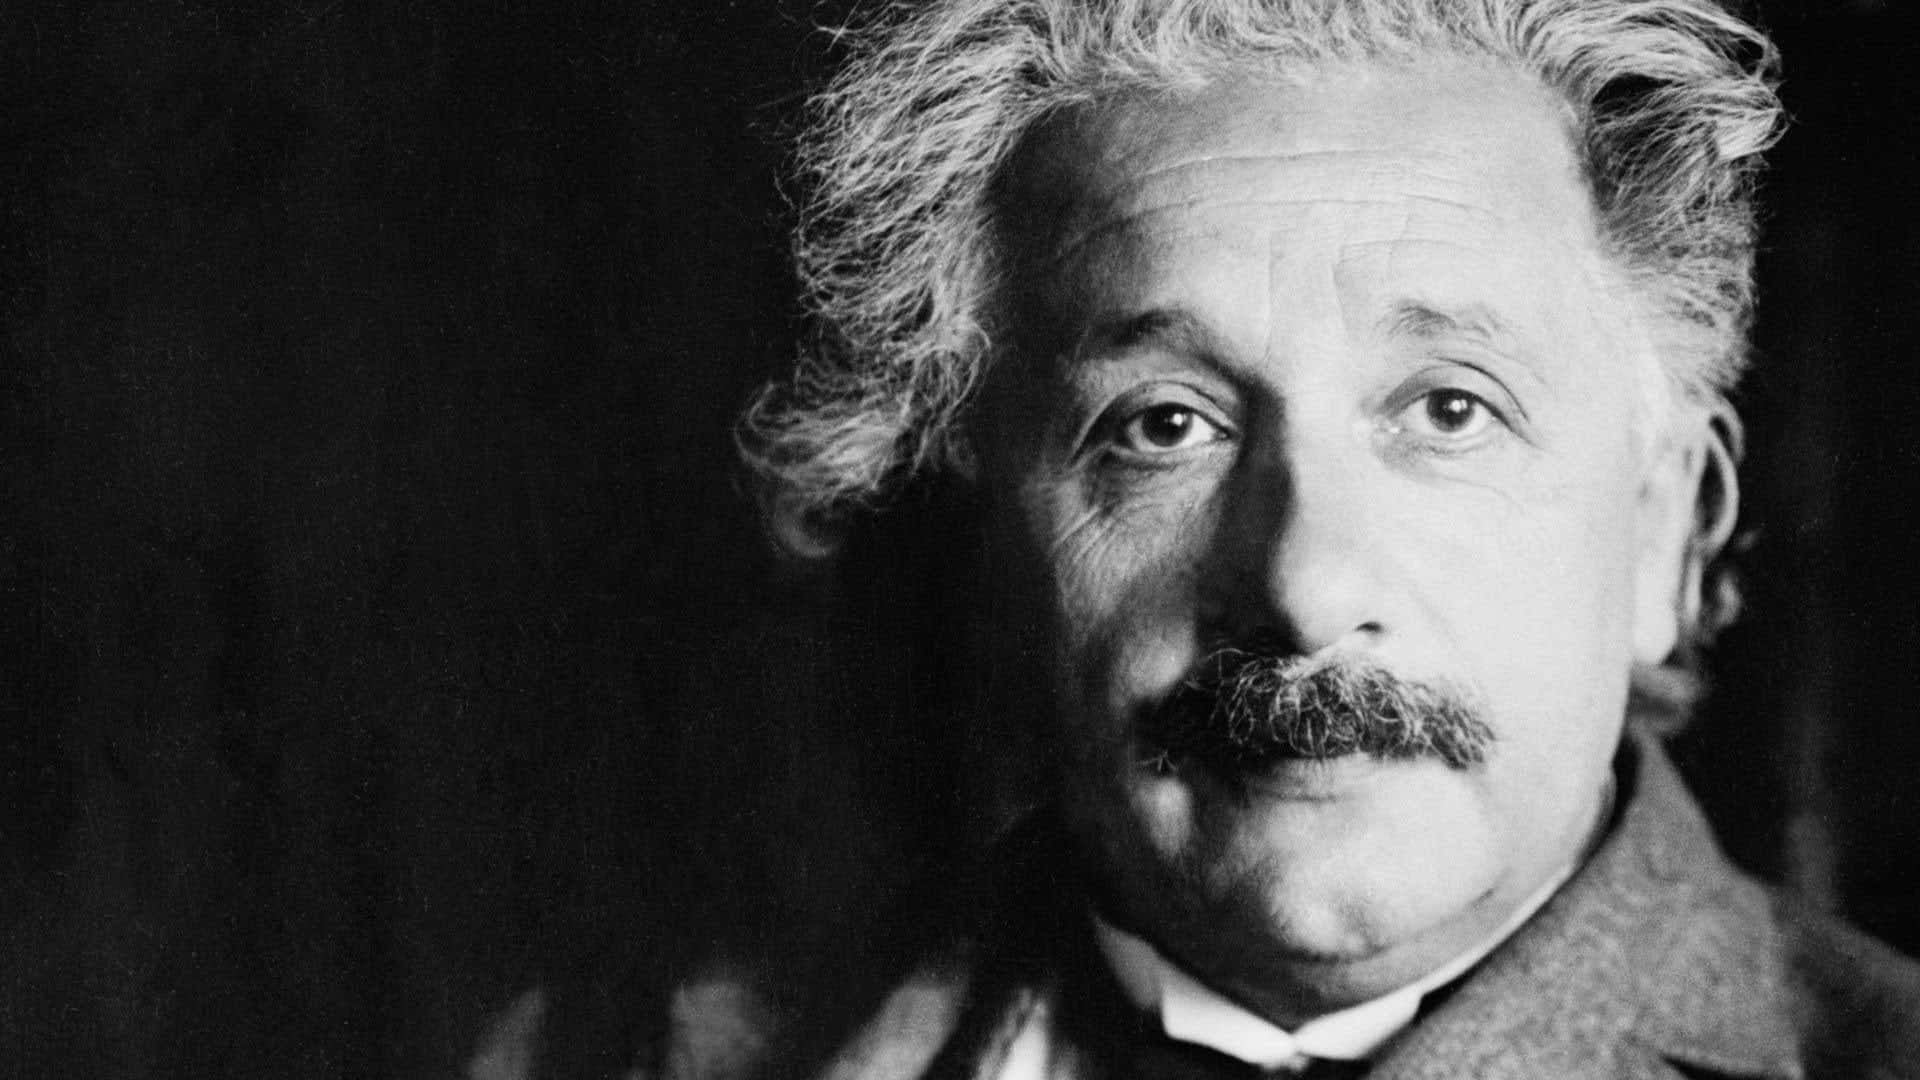 Albert Einstein - The Man Who Invented The Theory Of Relativity